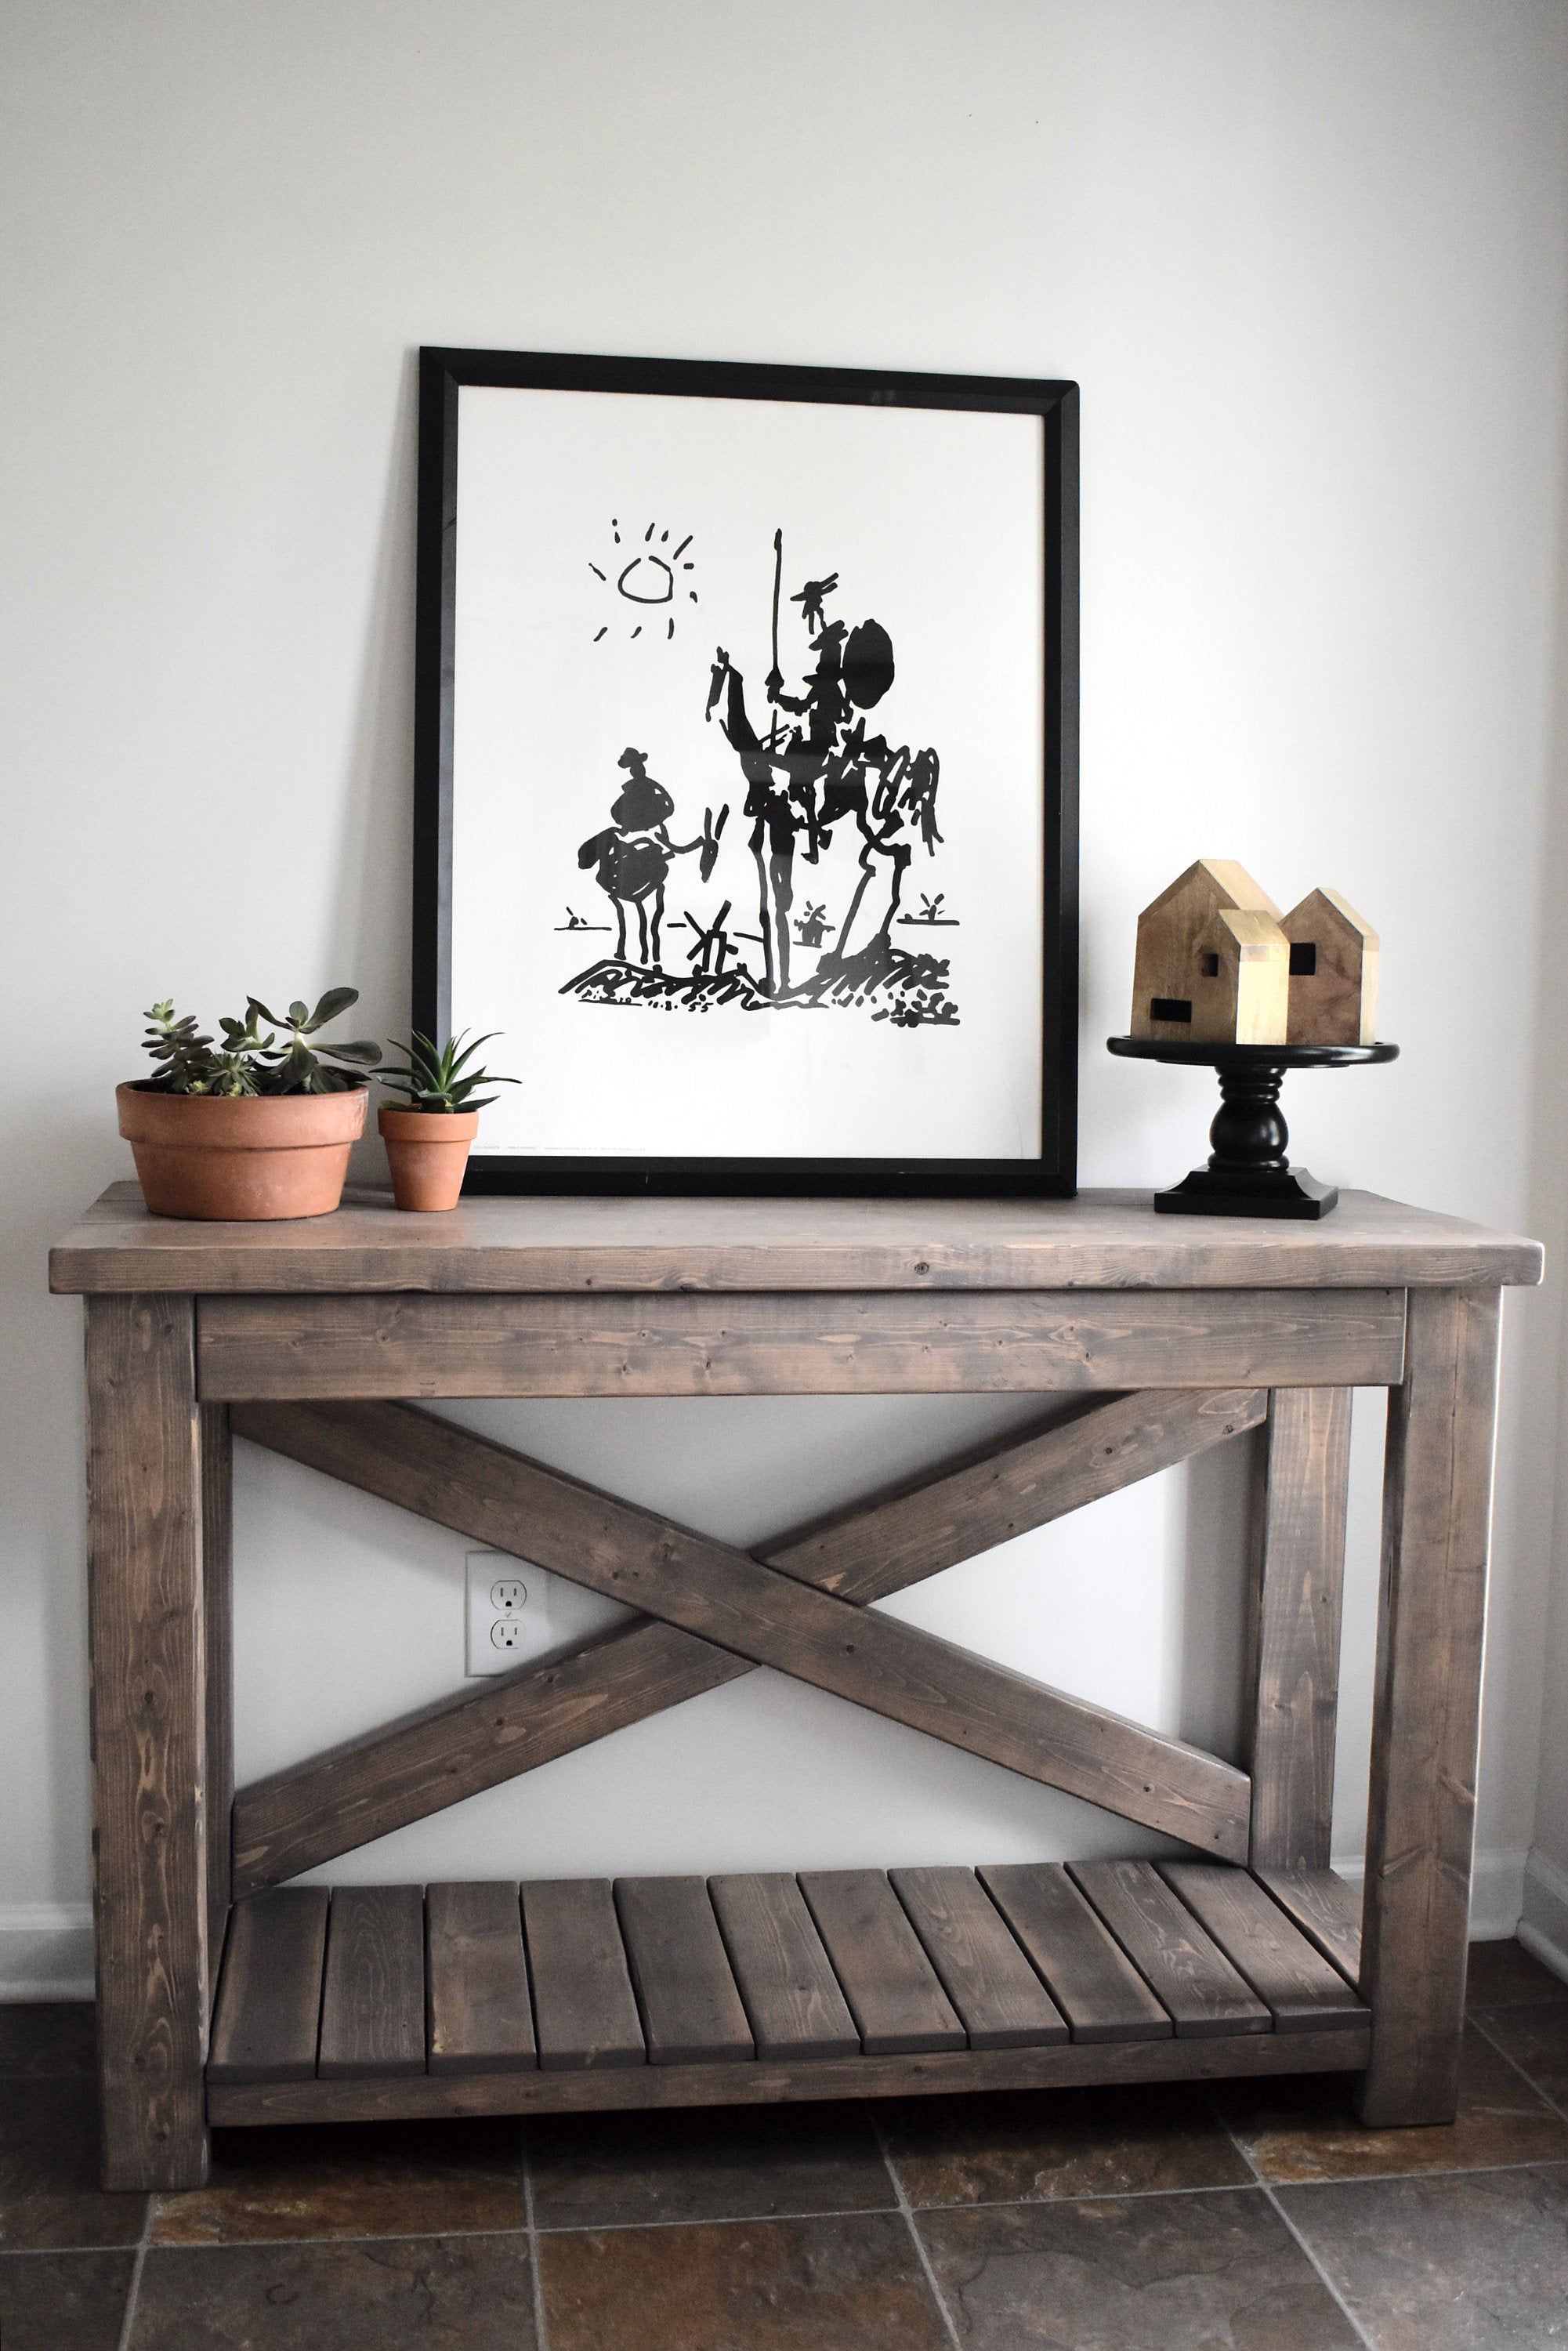 Handcrafted Wood Rustic Console Table Modern Farmhouse - Handcrafted Wood Rustic Console Table Modern Farmhouse -   19 diy Table rustic ideas